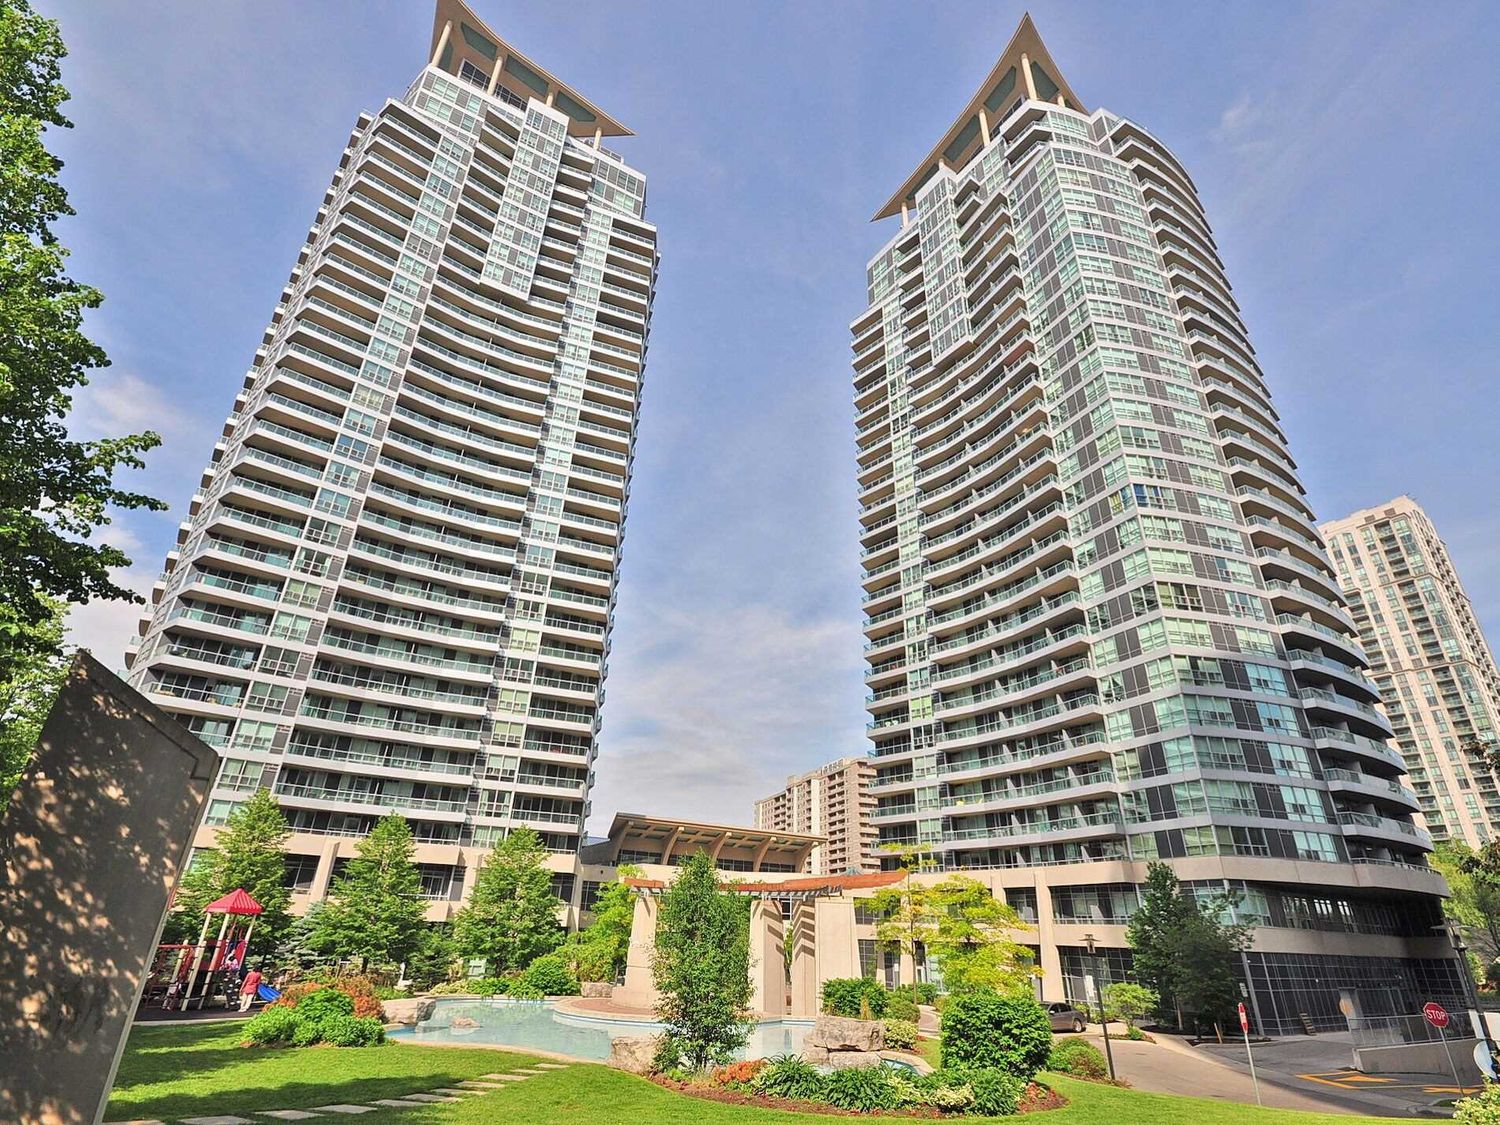 1 Elm Drive W. One City Centre Condos is located in  Mississauga, Toronto - image #1 of 2